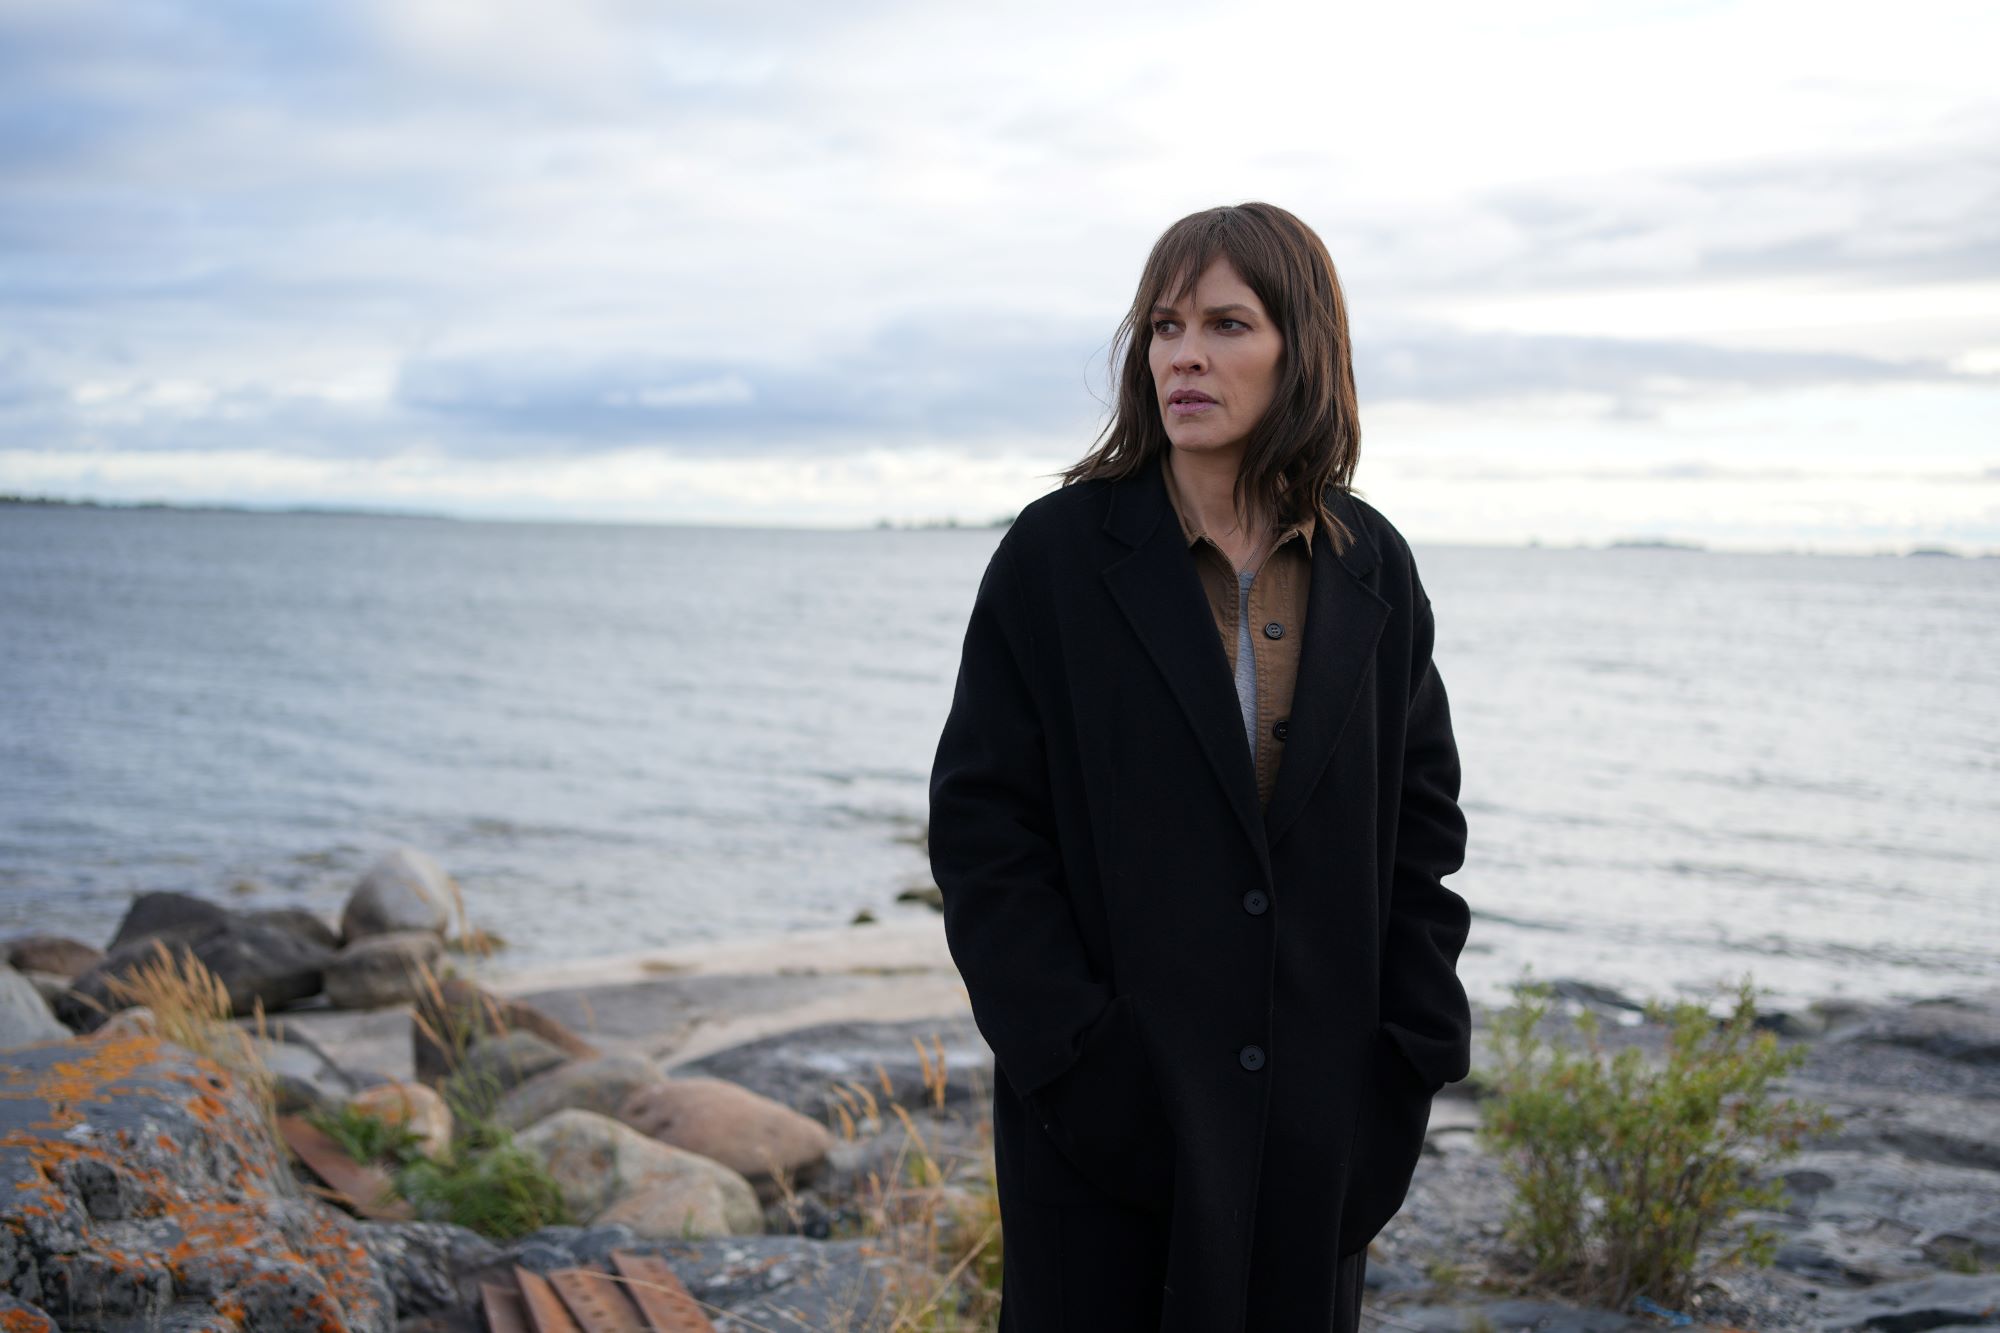 Hilary Swank, in character as Eileen Fitzgerald in the show 'Alaska Daily' on ABC, wears a black coat over a brown button-up shirt and stands in front of a body of water.